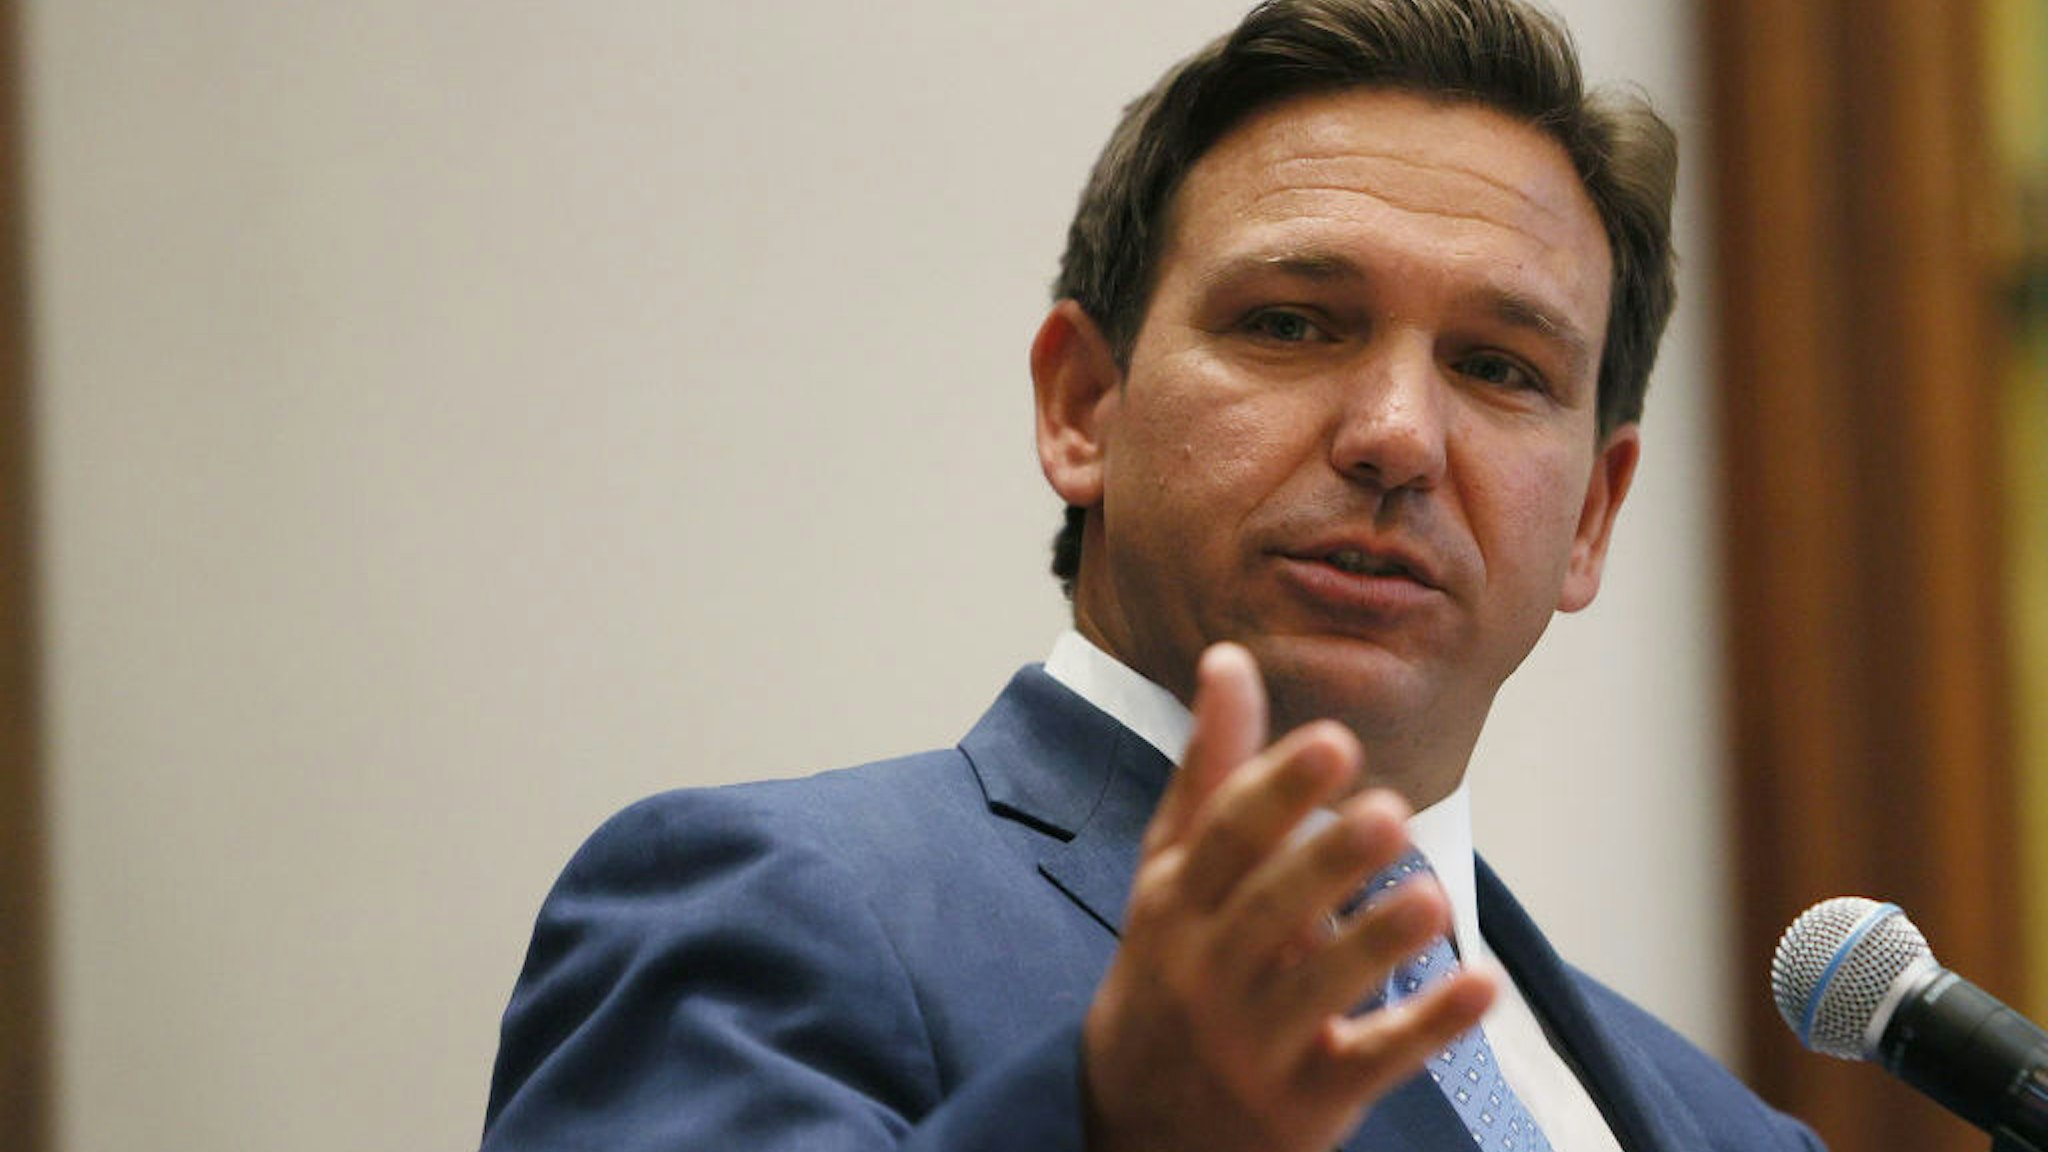 SURFSIDE, FLORIDA - JUNE 14: Florida Gov. Ron DeSantis speaks during a press conference at the Shul of Bal Harbour on June 14, 2021 in Surfside, Florida. The governor spoke about the two bills he signed HB 529 and HB 805. HB 805 ensures that volunteer ambulance services, including Hatzalah, can operate. HB 529 requires Florida schools to hold a daily moment of silence. (Photo by Joe Raedle/Getty Images)